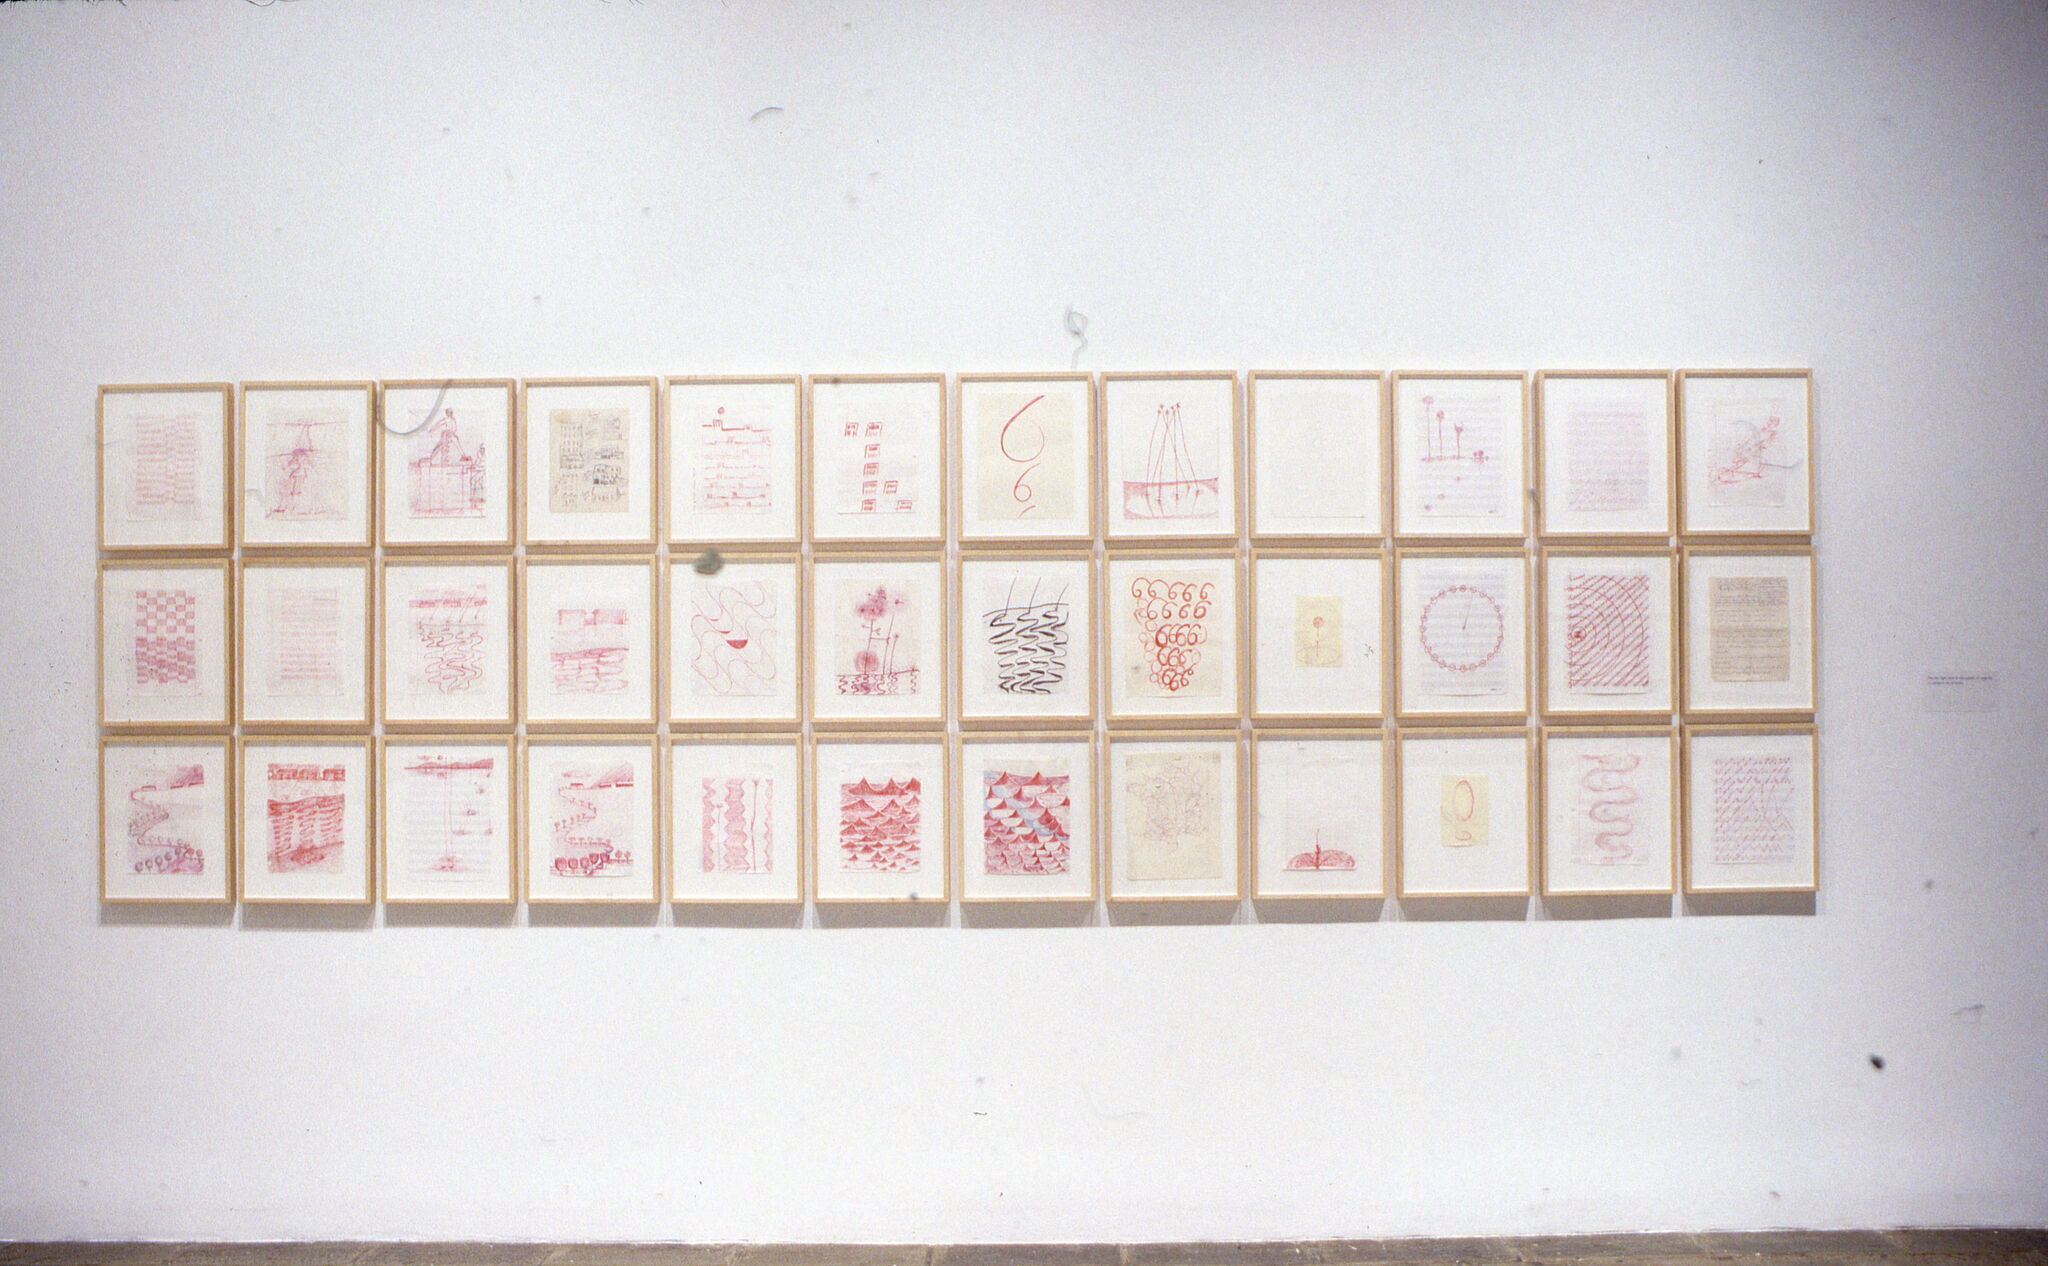 Three rows of drawings displayed in frames hung on a wall.